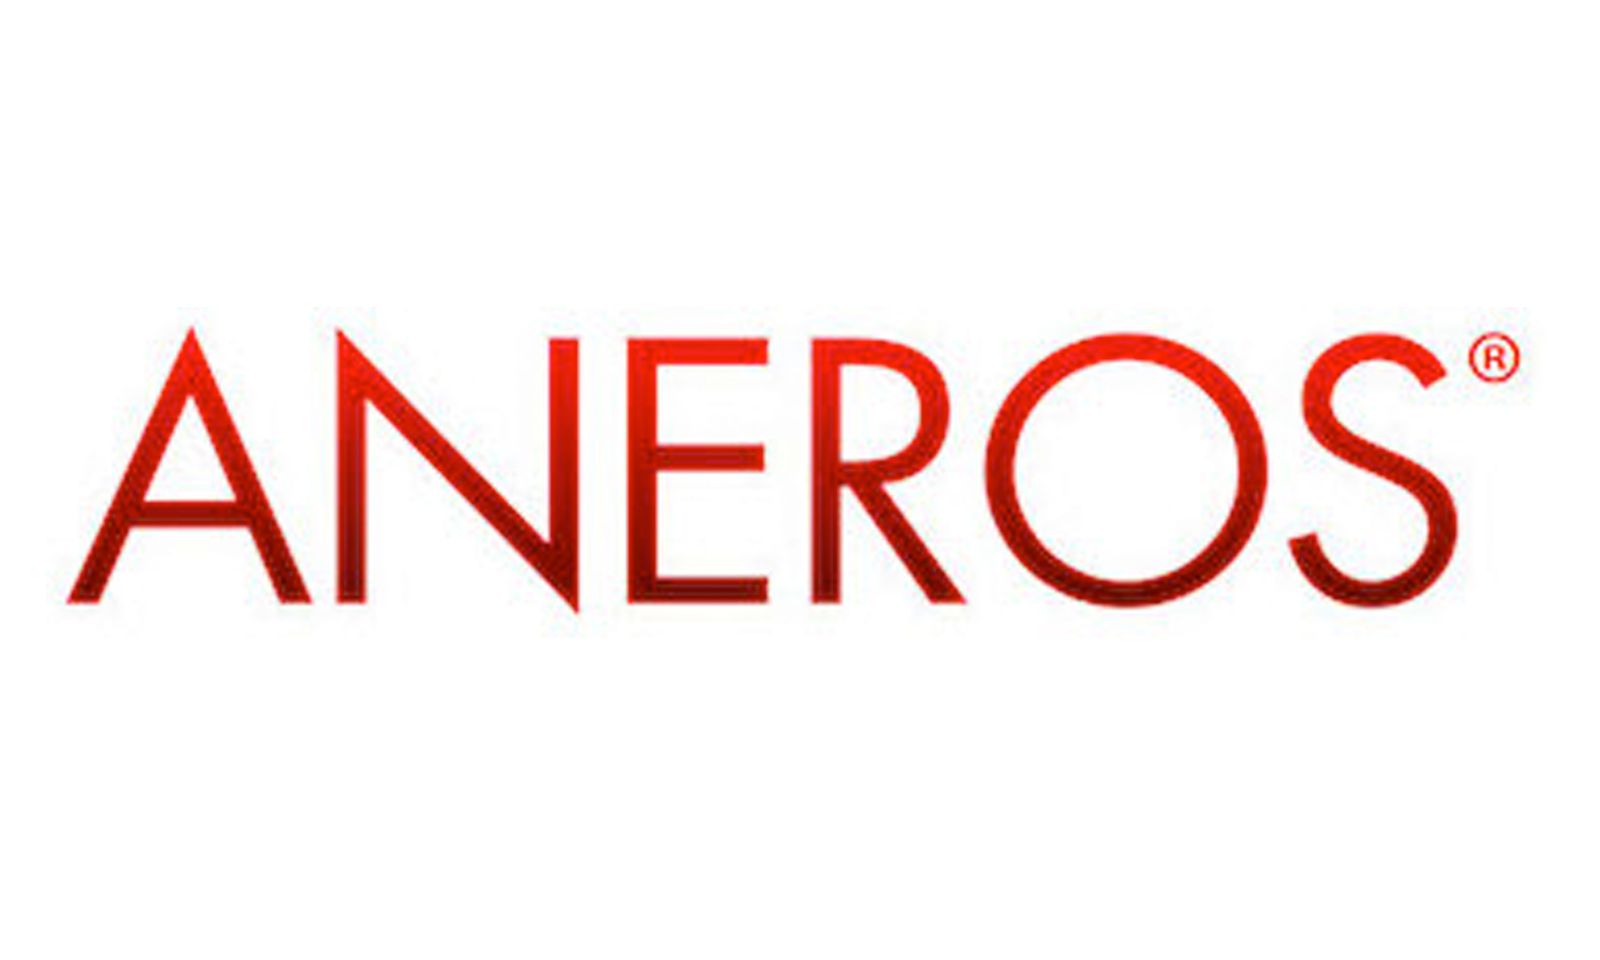 Aneros, Buccone Ink Distro Deal for China, Taiwan